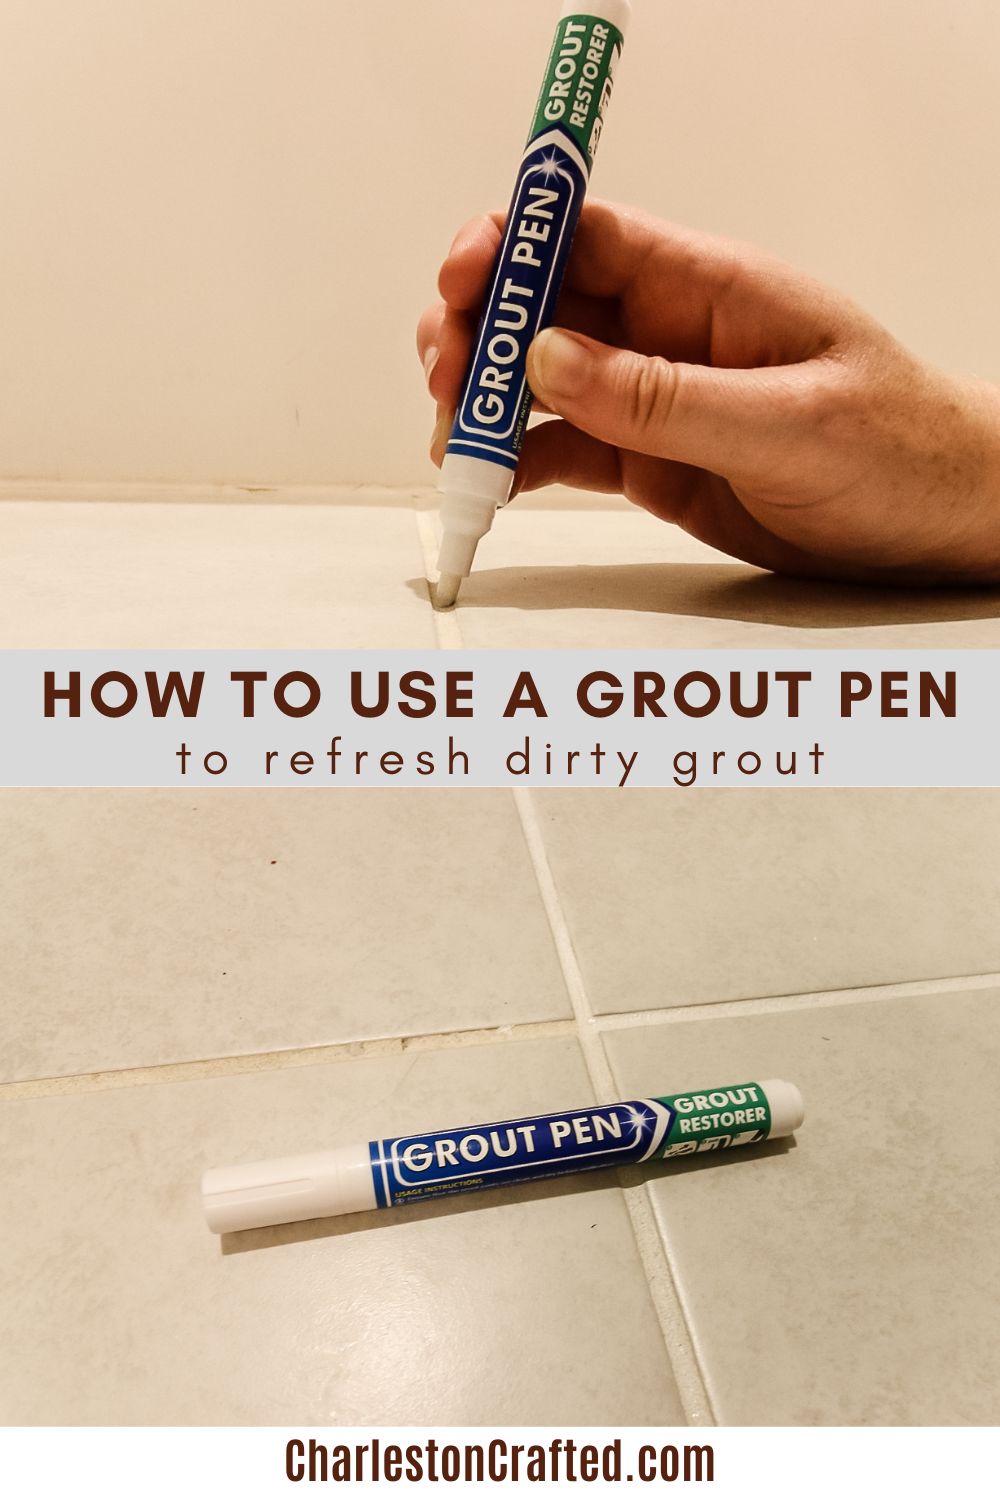 How to use a grout pen